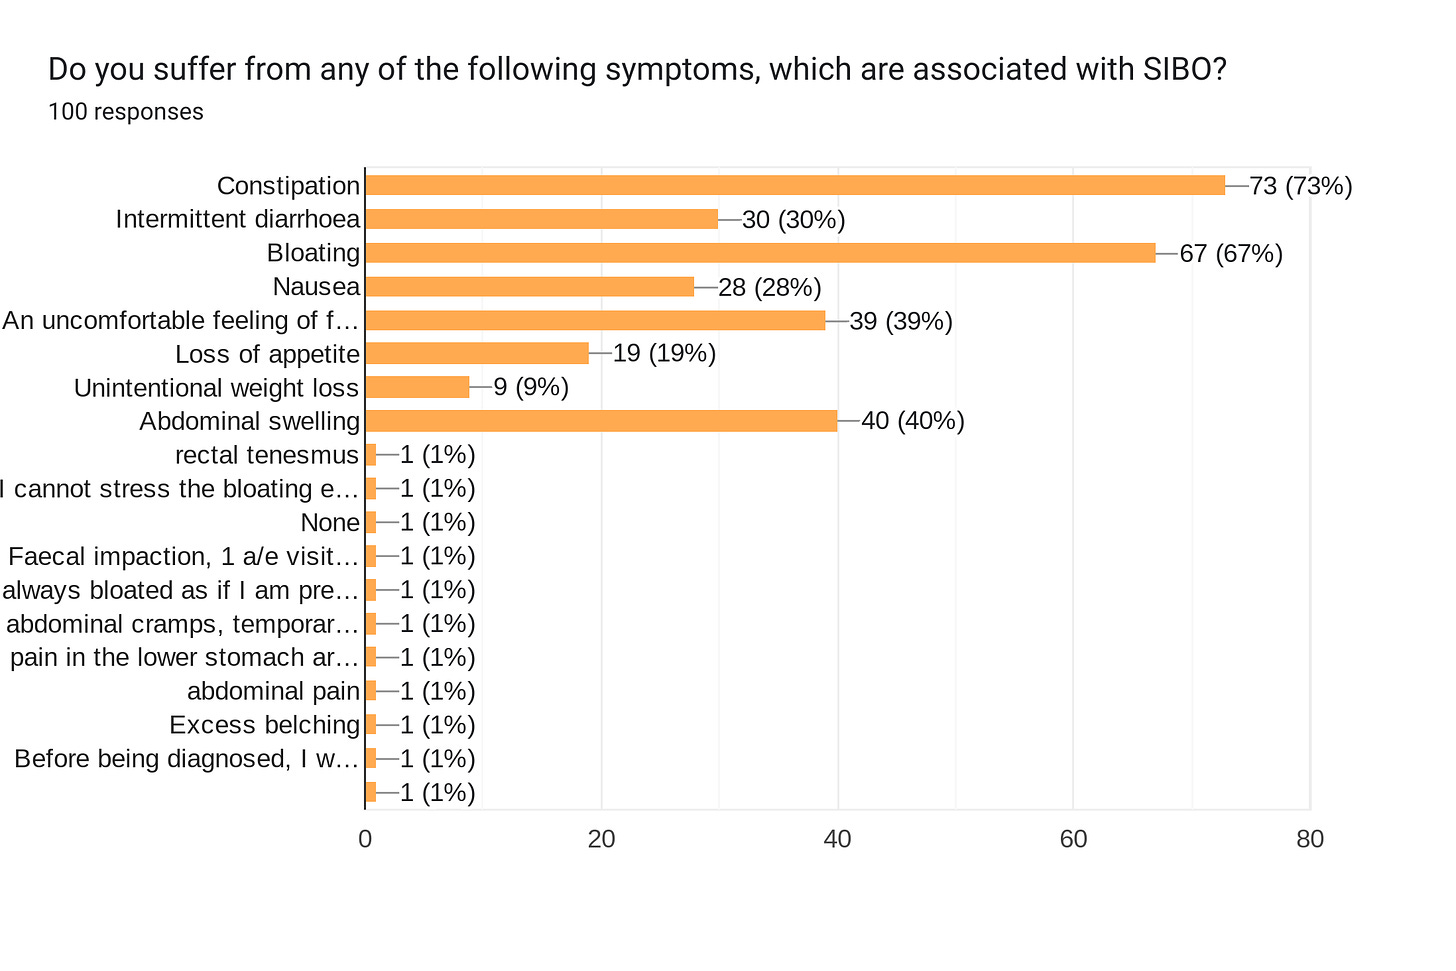 Forms response chart. Question title: Do you suffer from any of the following symptoms, which are associated with SIBO? . Number of responses: 100 responses.